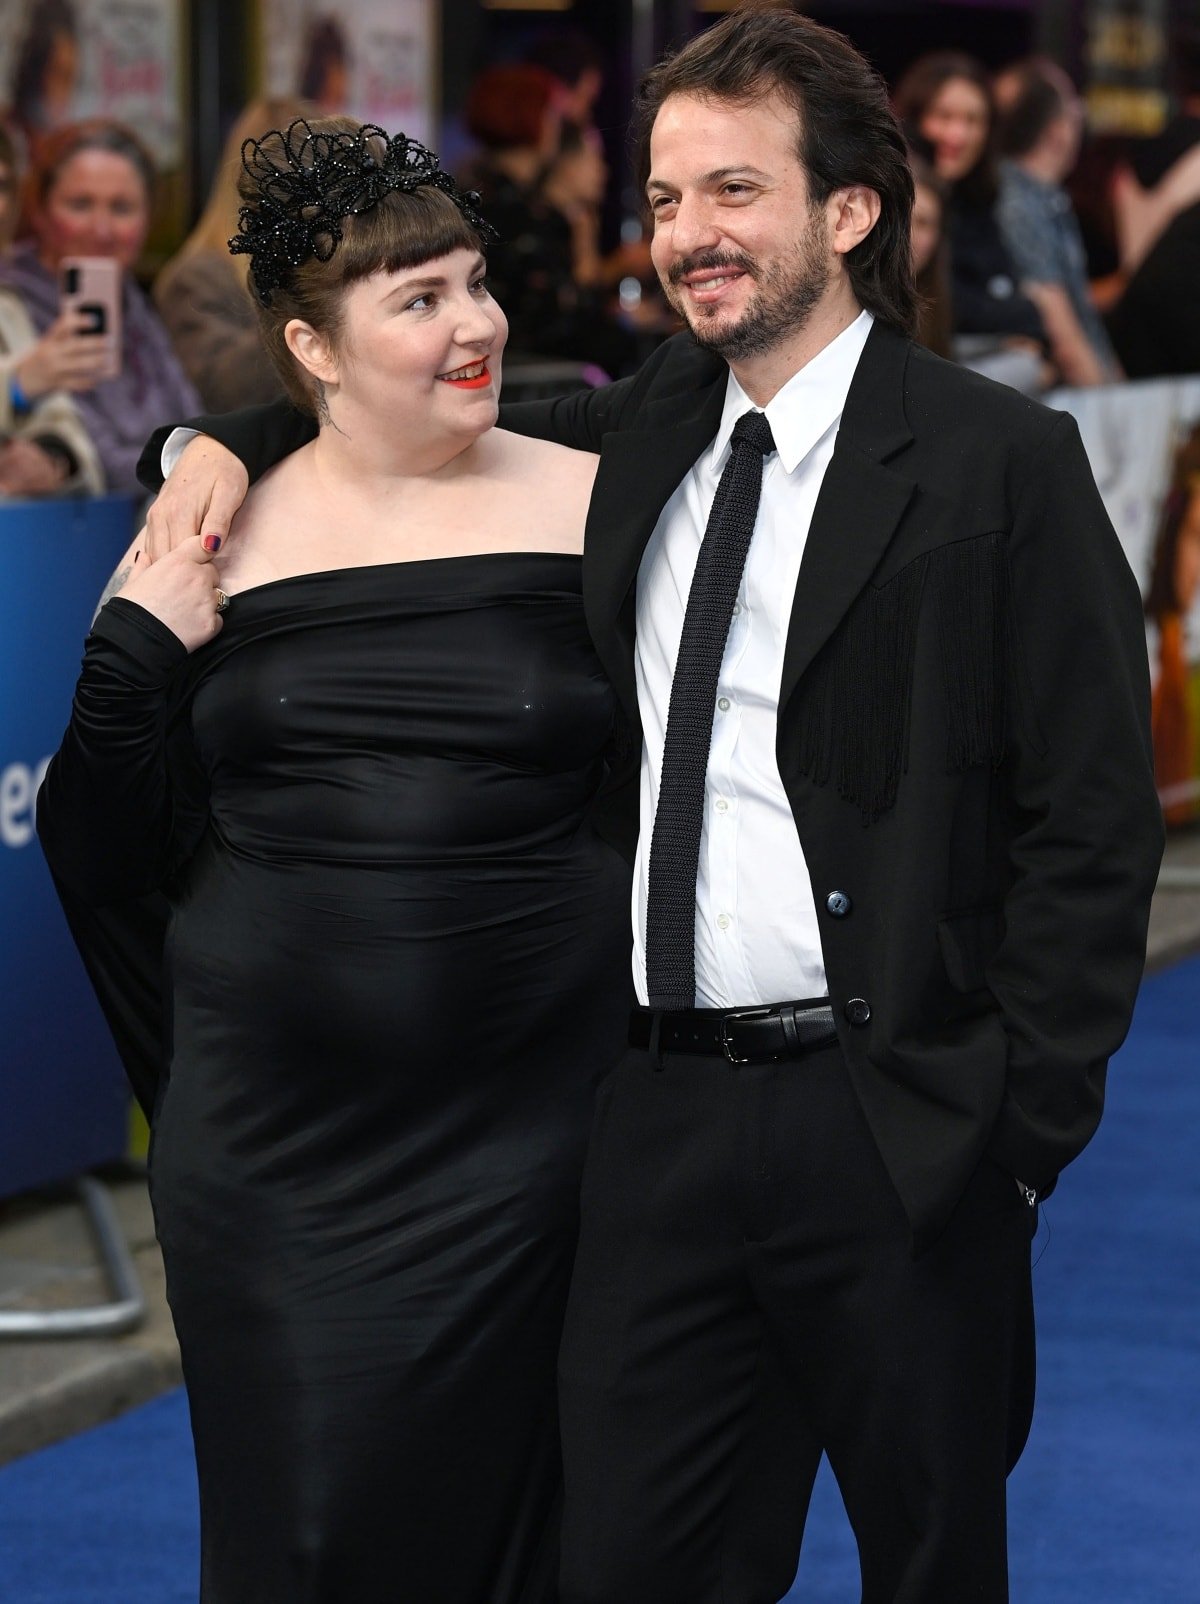 Lena Dunham looking fondly at husband Luis Felber at the premiere of her film, Catherine Called Birdy, in London